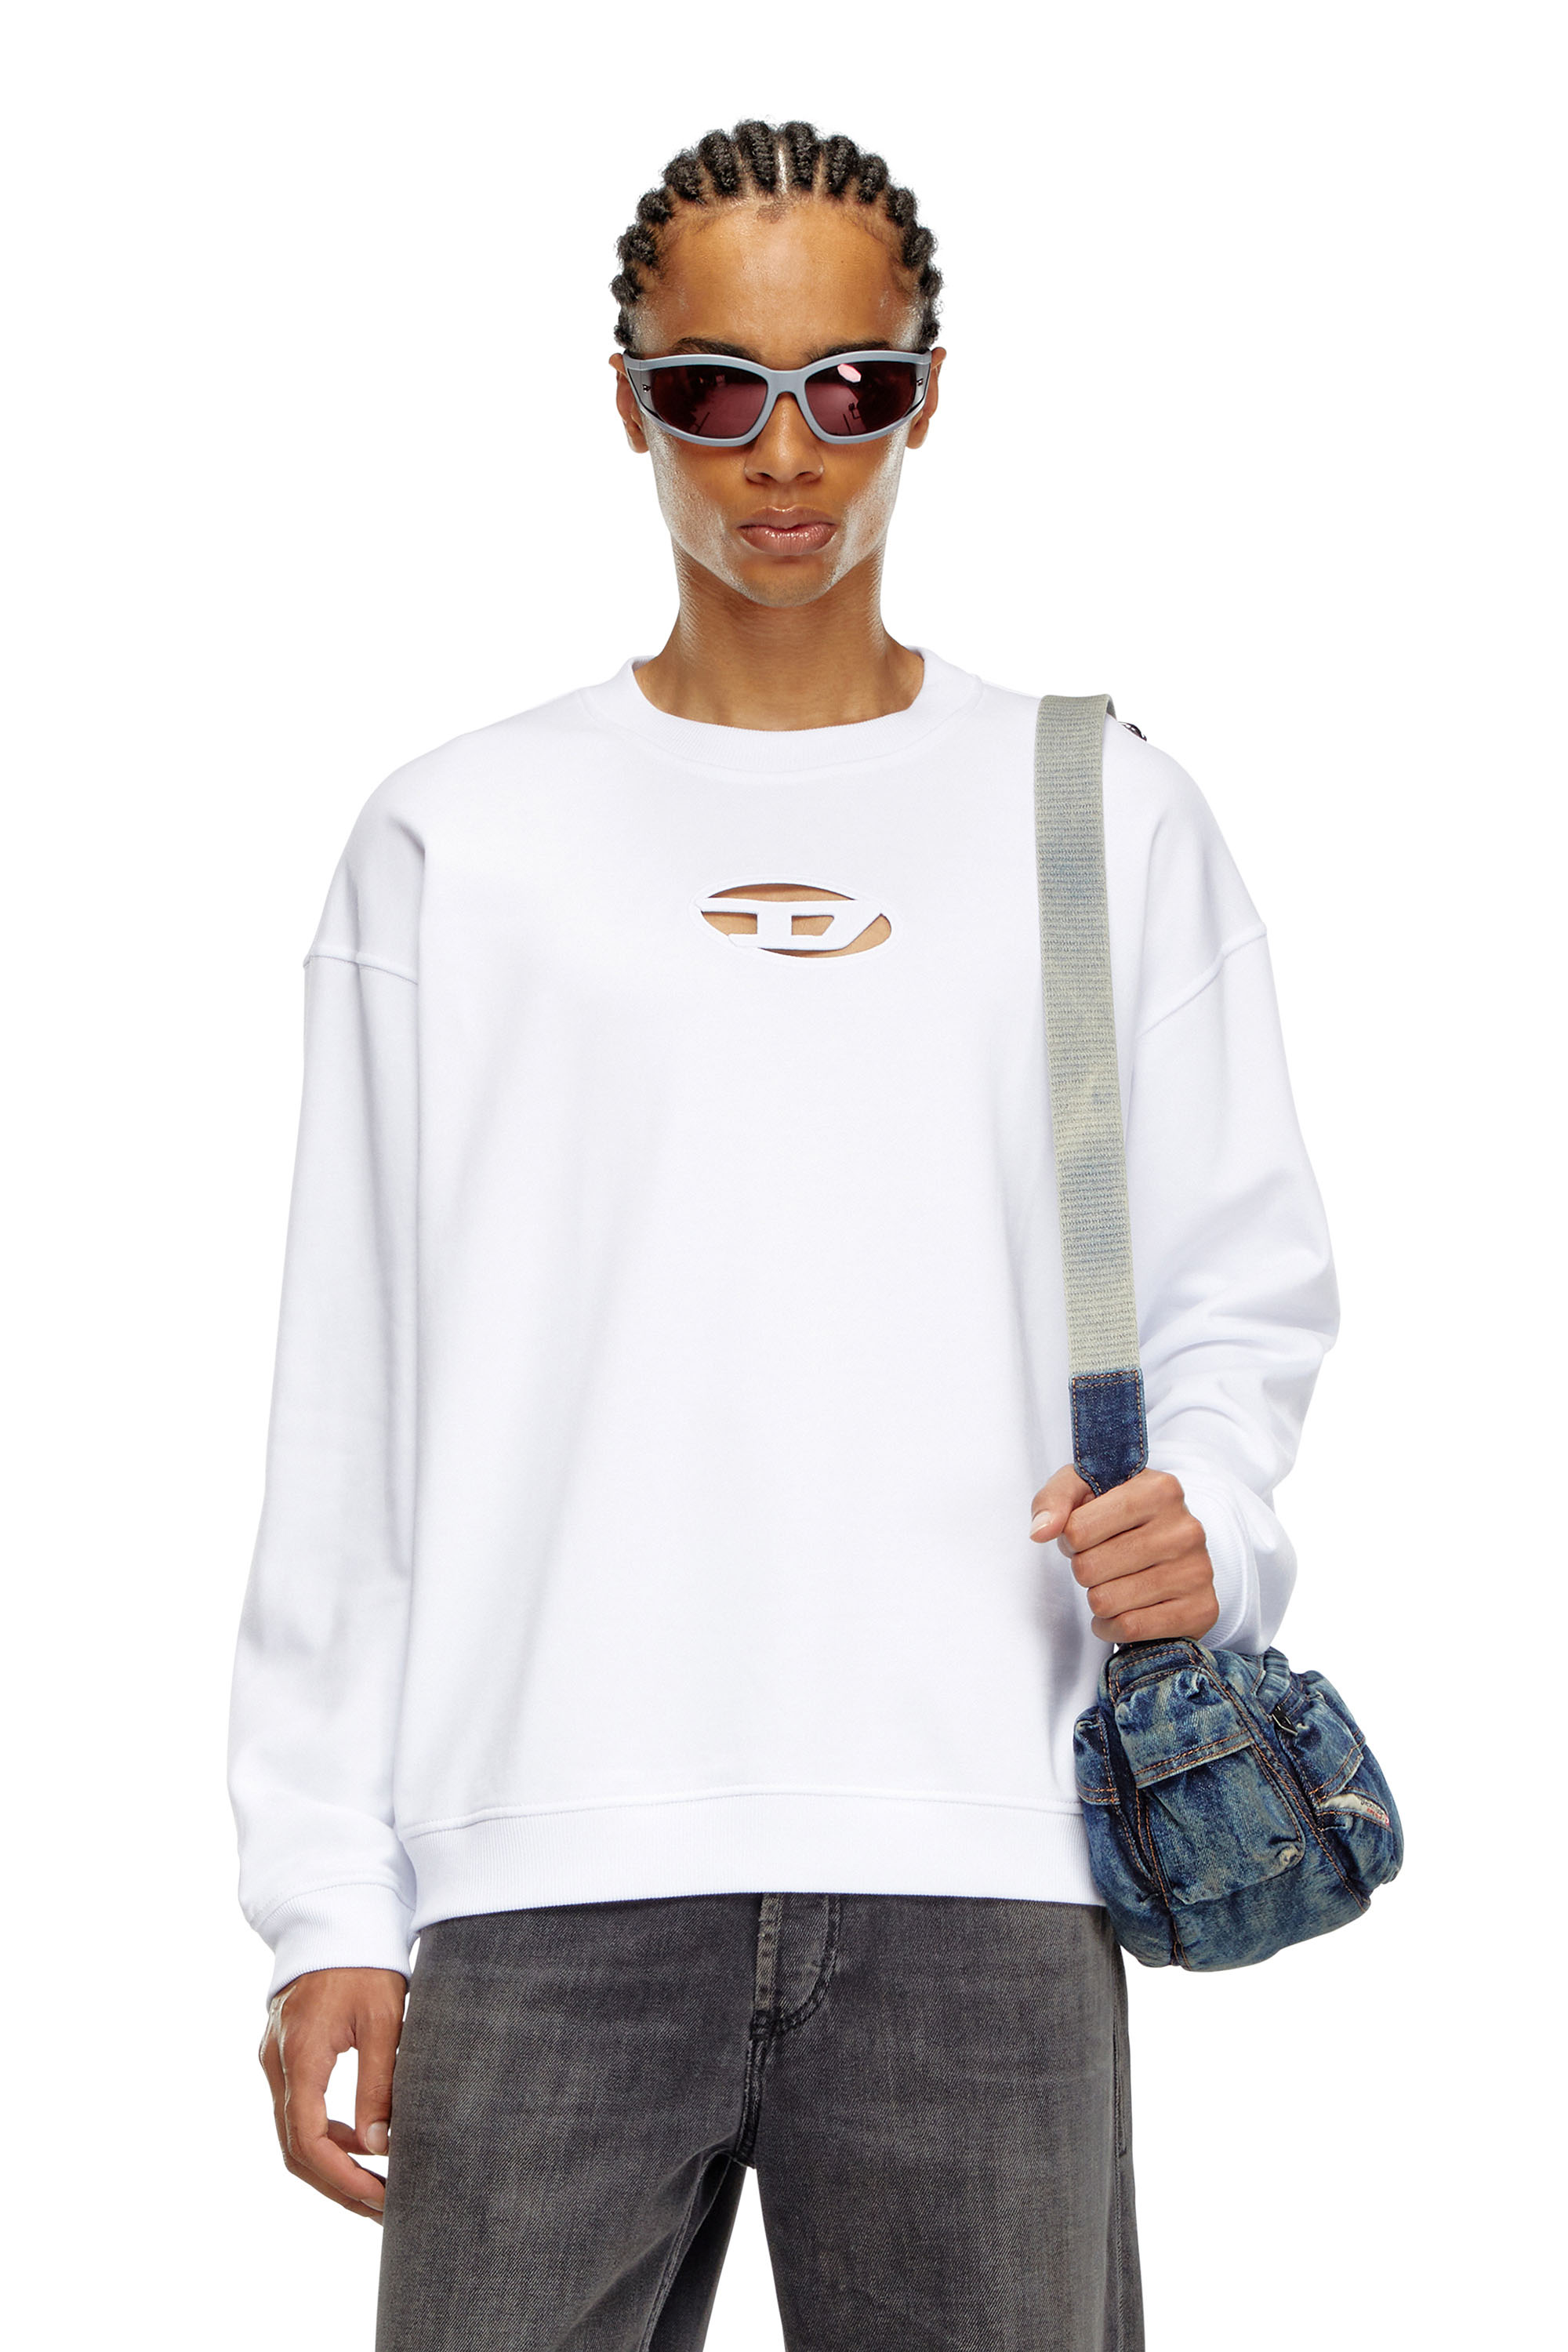 Diesel - S-BOXT-OD, Homme Sweat-shirt avec cut-out Oval D in Blanc - Image 1